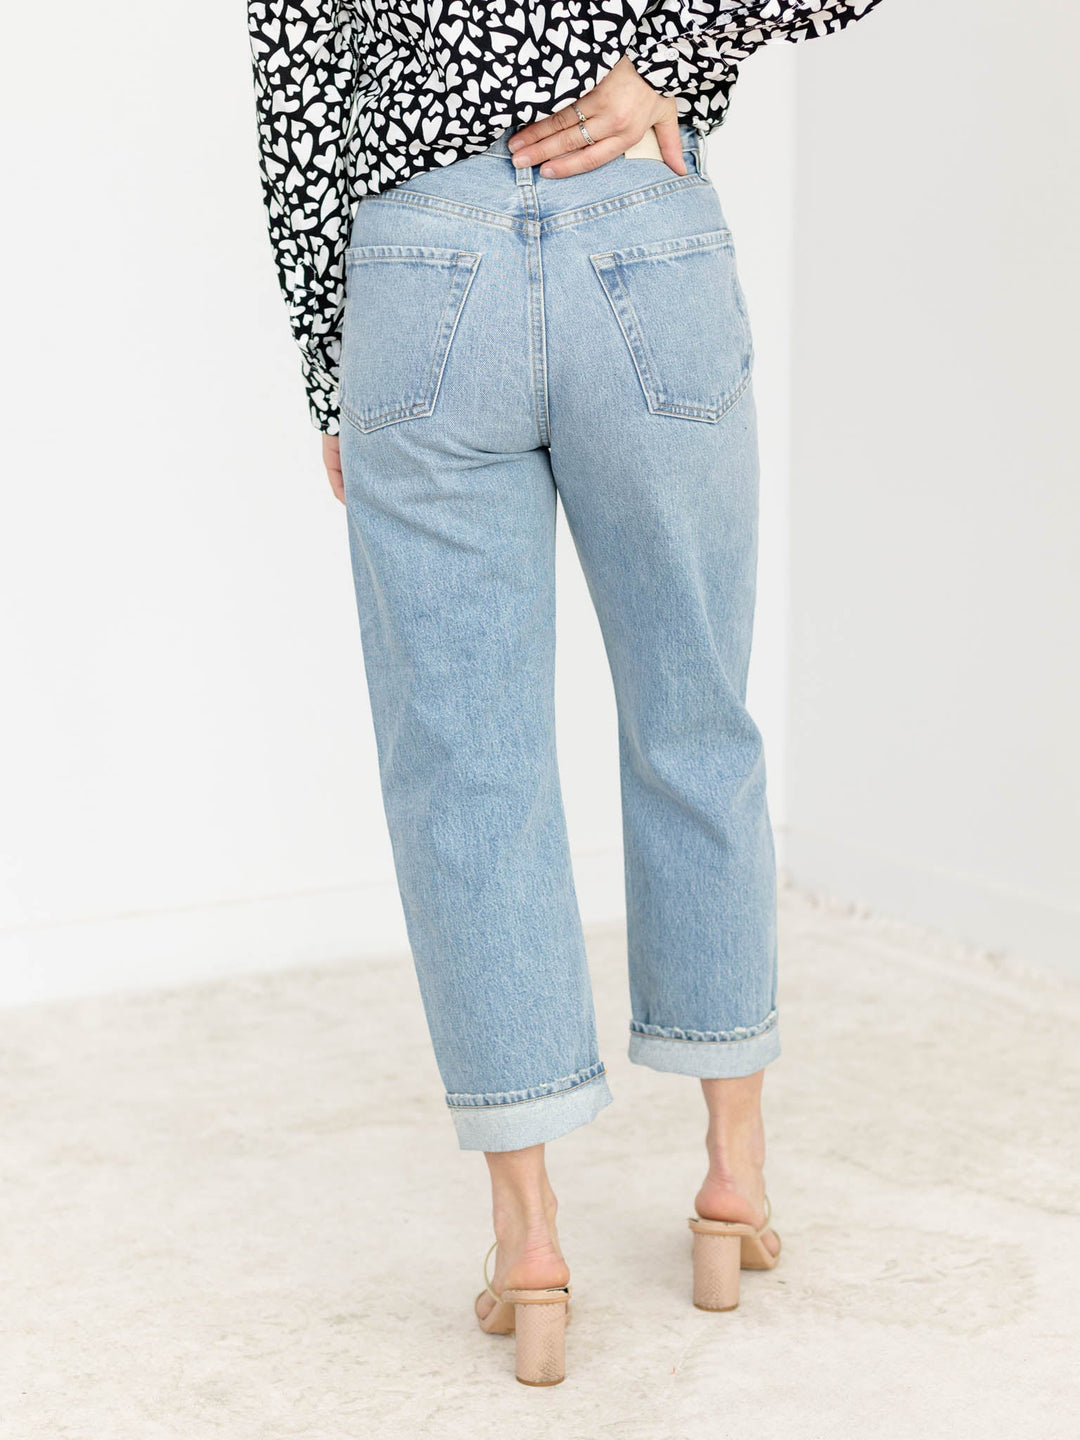 Citizens of Humanity Ribbon Dahlia Baby RollDenim jeans